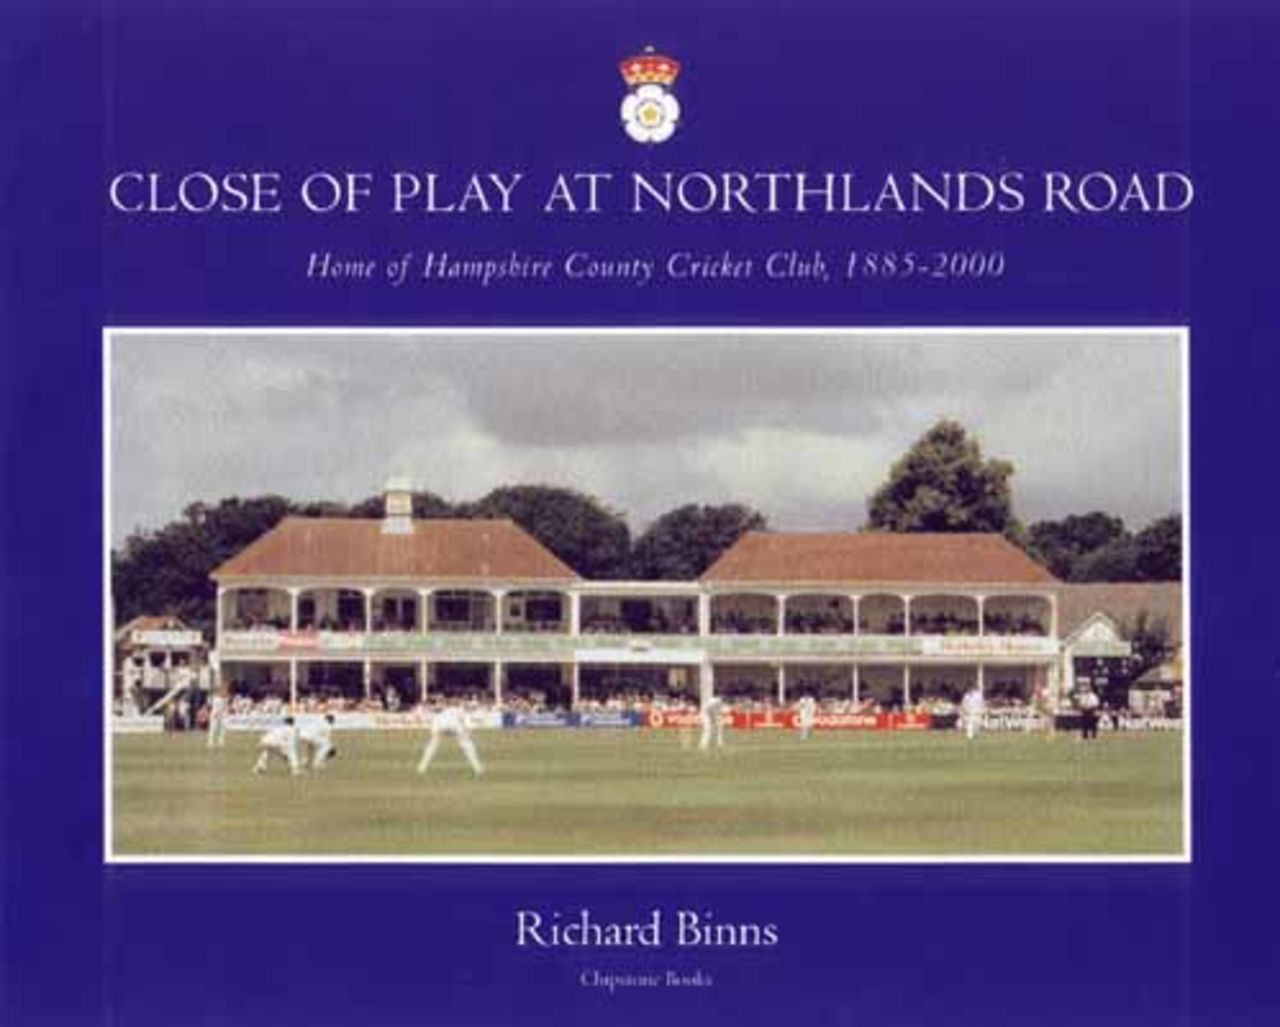 Richard Binns much praised book, depicting scenes from Northlands Road, available now in paperback ...